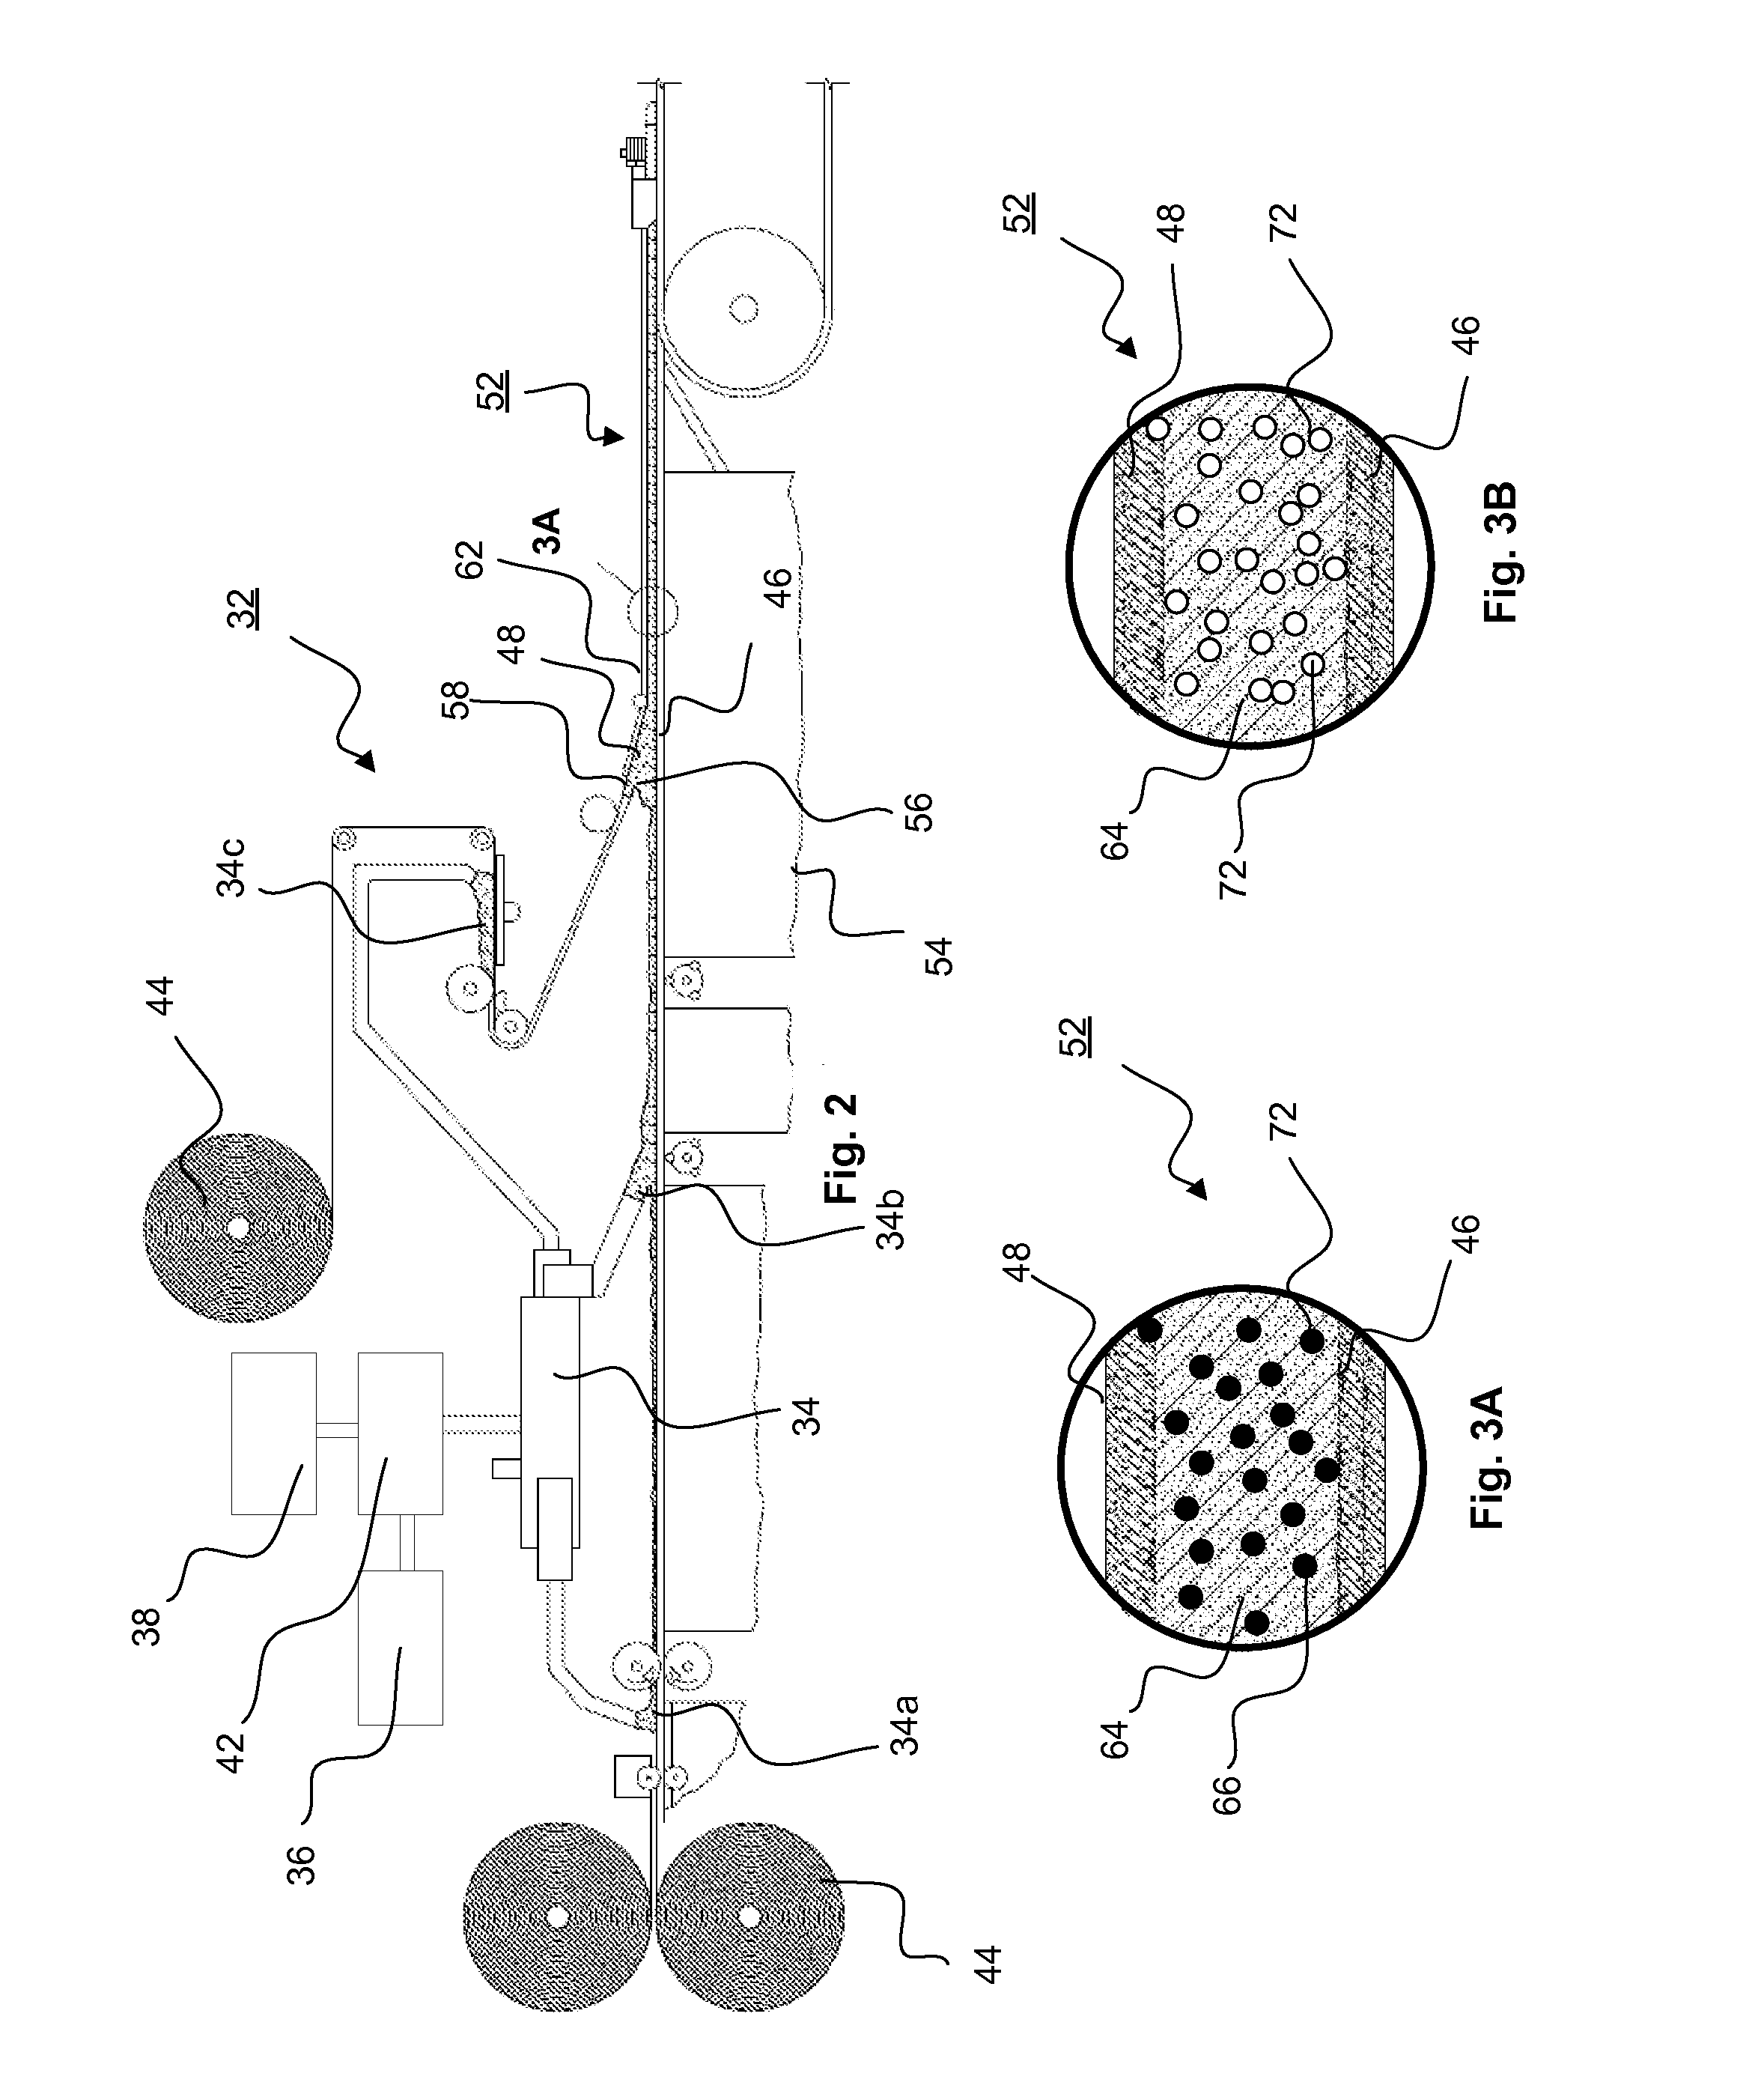 System and Method for the Production of Gypsum Board Using Starch Pellets